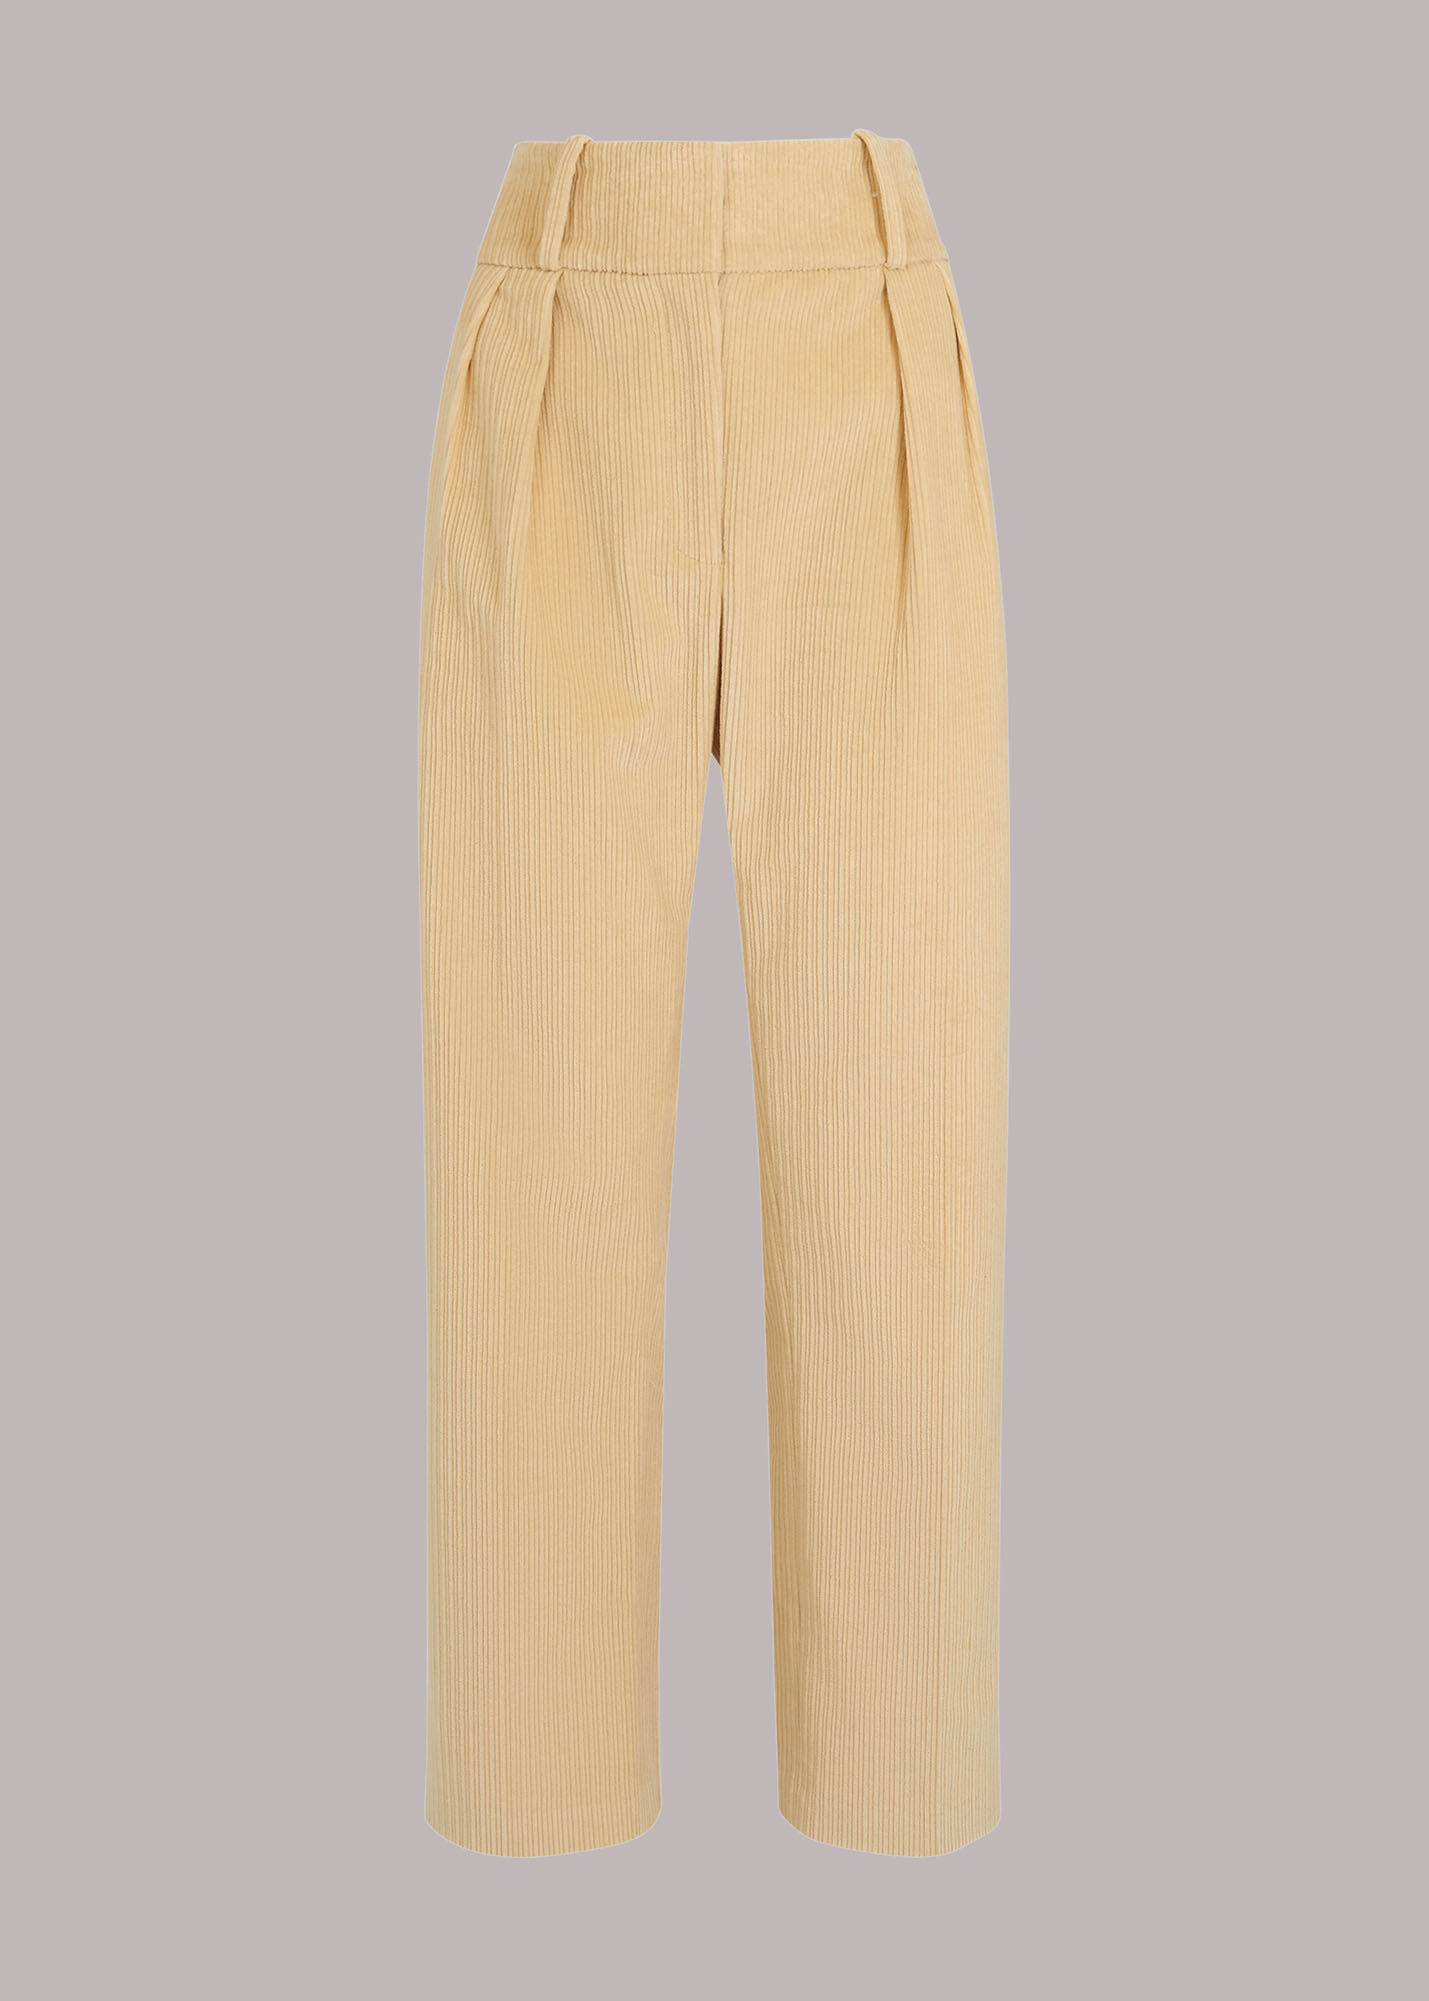 Topshop Caitlin Corduroy Trousers In Brown  ModeSens